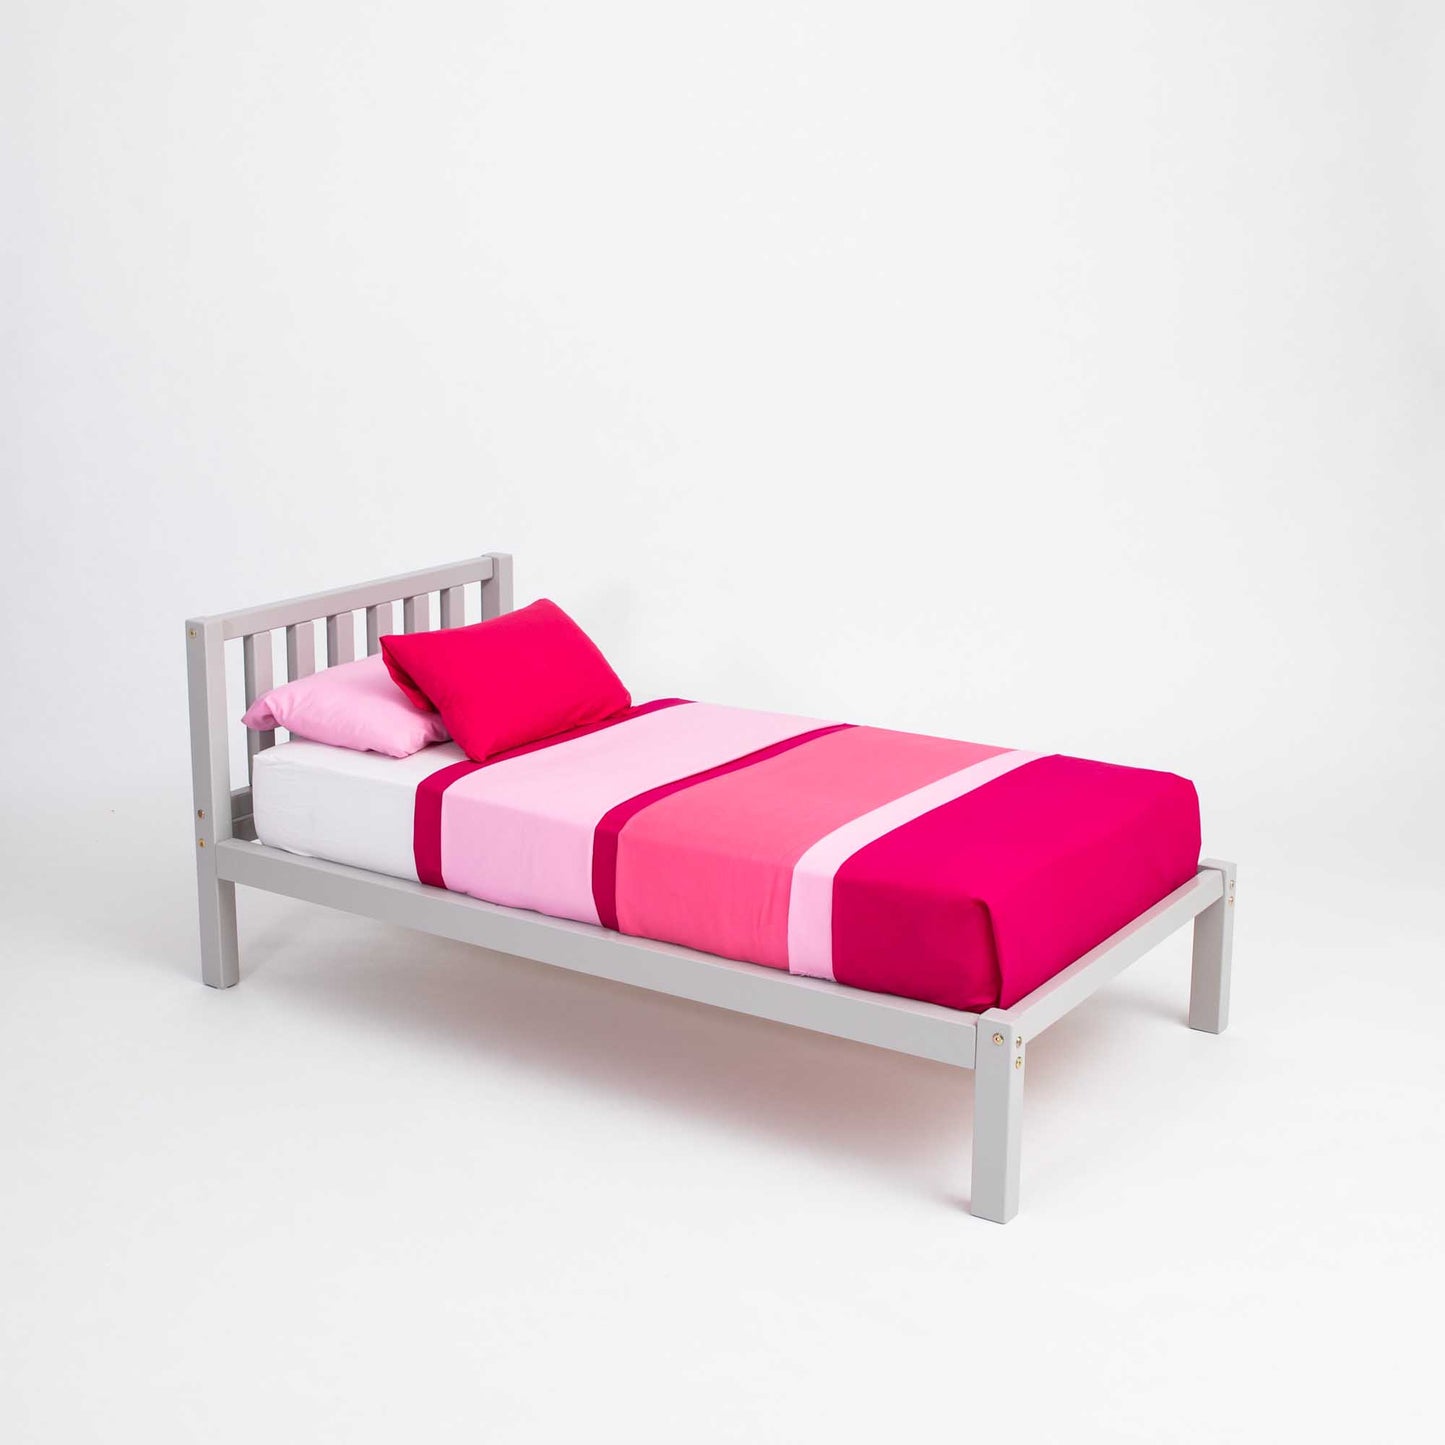 A pink and white Sweet Home From Wood Montessori bed with a grey frame, kids' bed on legs with a headboard.